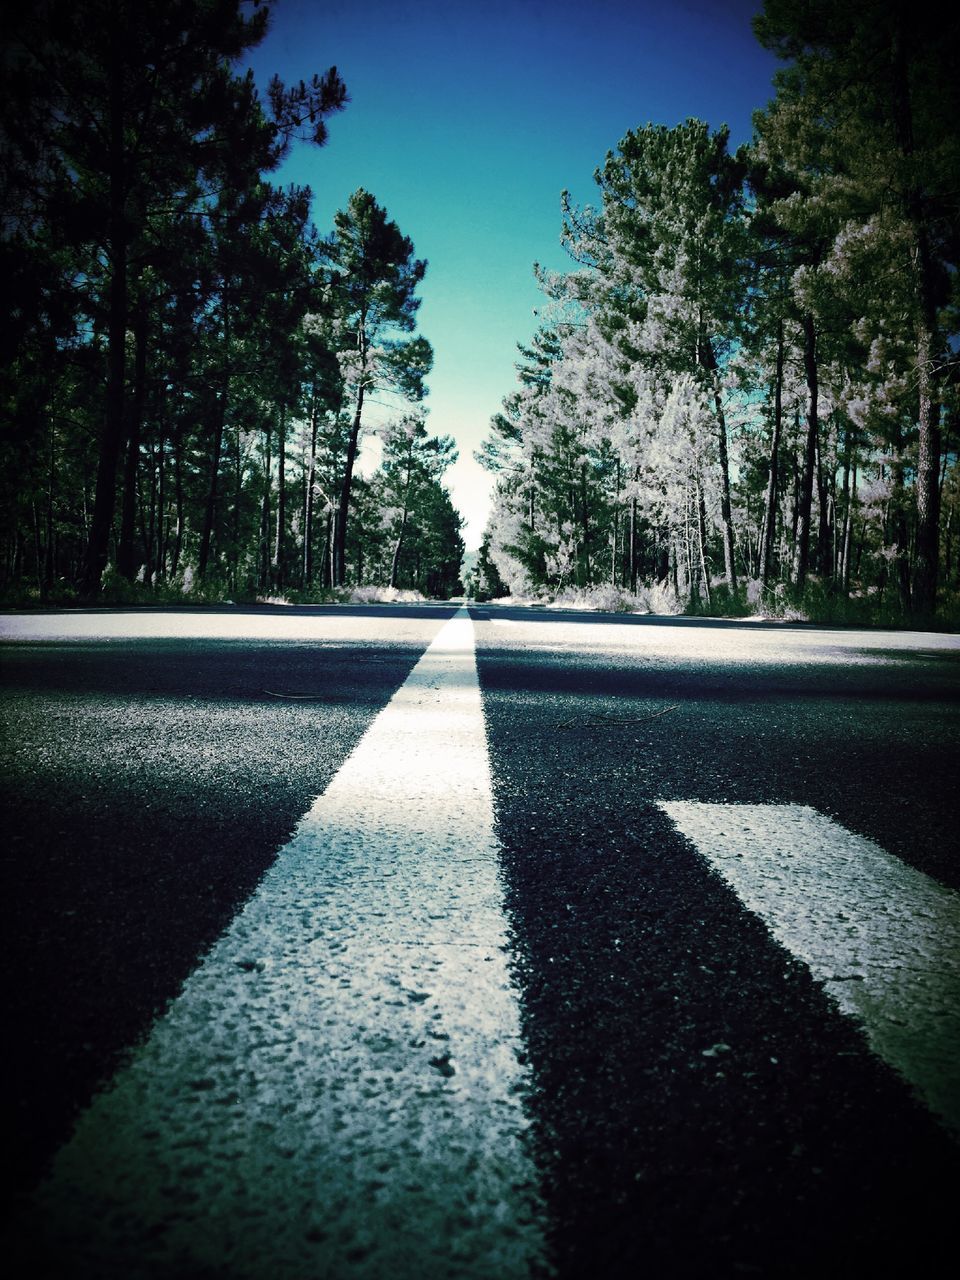 tree, the way forward, road marking, road, asphalt, diminishing perspective, shadow, vanishing point, sunlight, street, day, transportation, no people, blue, surface level, clear sky, outdoors, nature, sky, tranquility